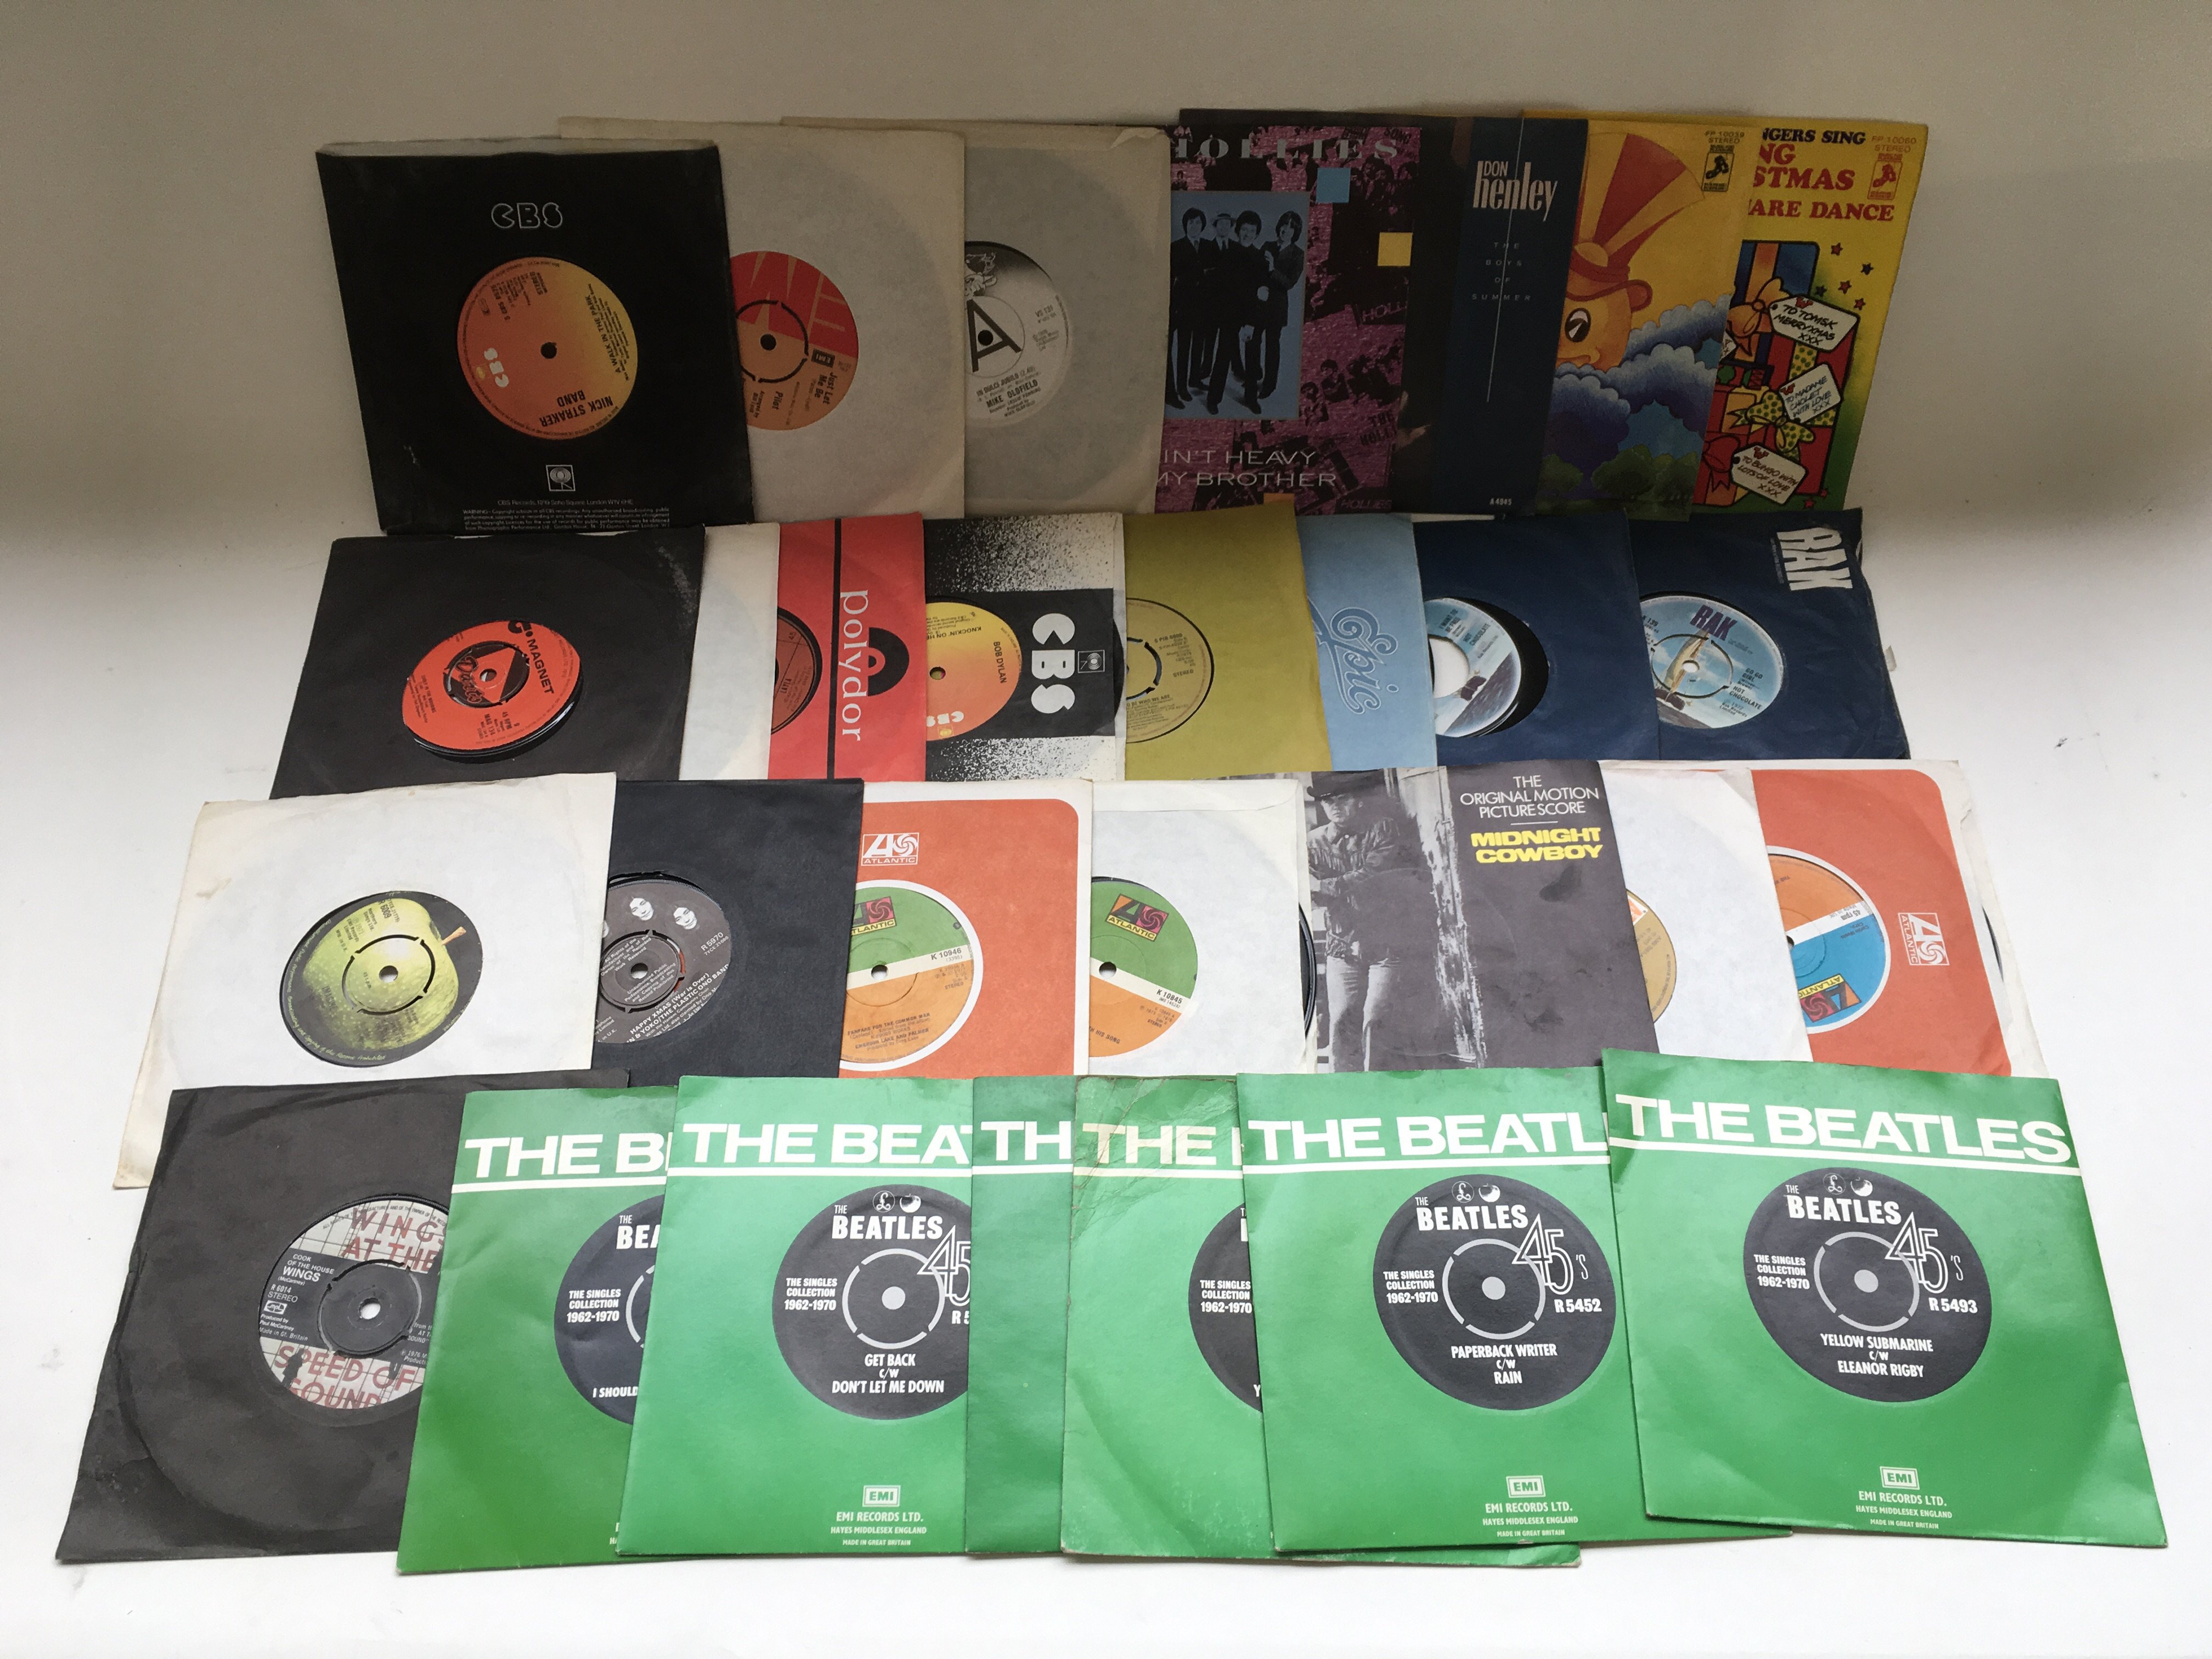 A collection of 7" singles by various artists incl